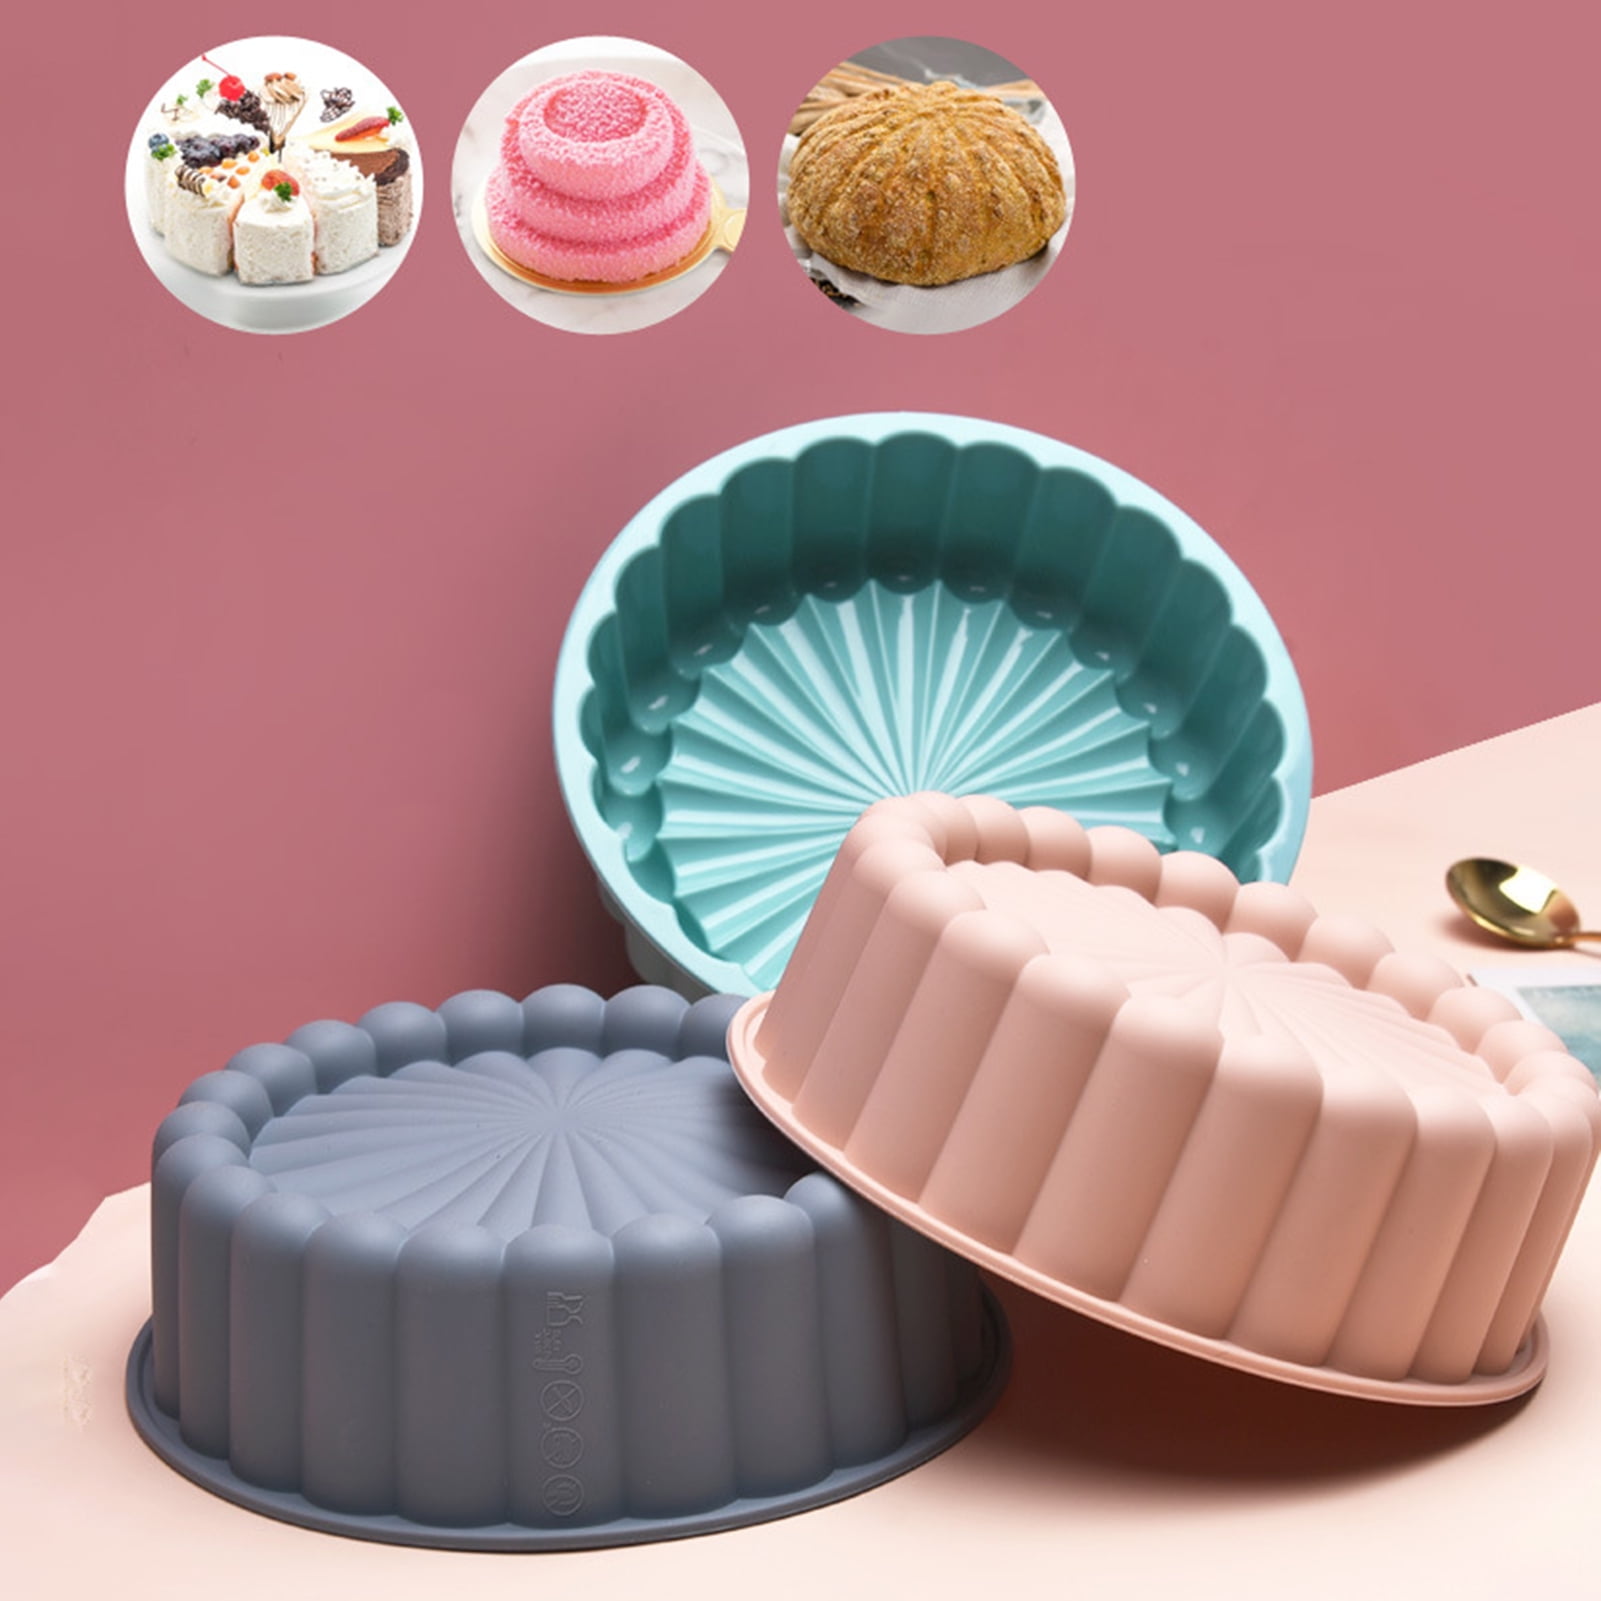 Zukuco 8 inch Round Cake Pans, Silicone Molds for Baking, Nonstick & Quick  Release Baking Pans for Cake, Cheese Cake and Chocolate Cake 